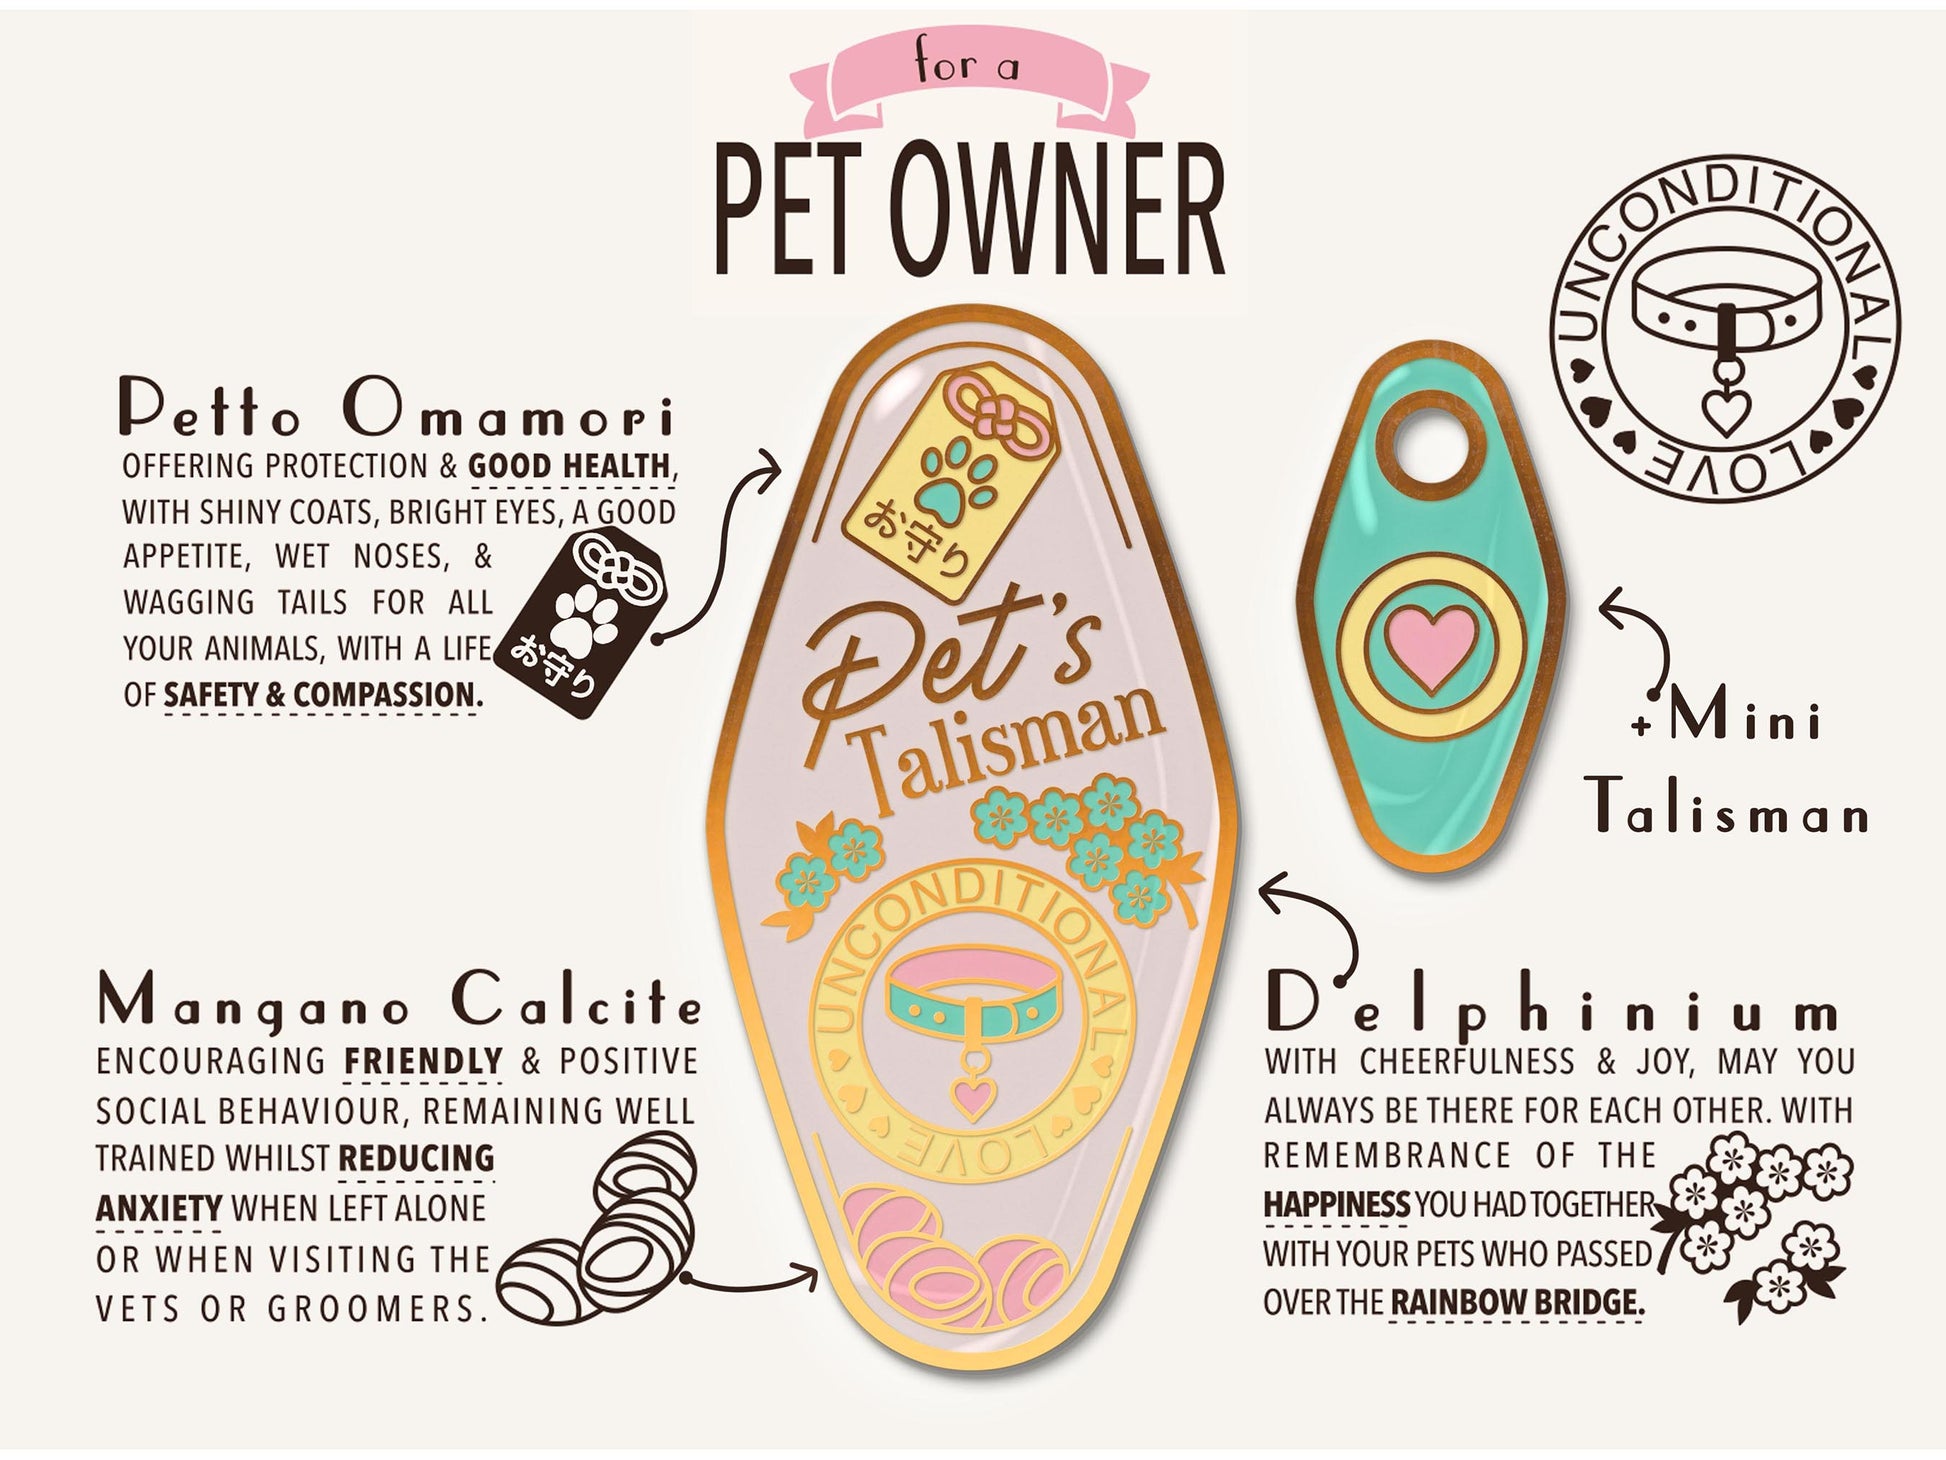 A illustrated diagram outline the symbolism of the different design elements of the for a Pet Owner's Talisman pin and charm. Information includes the meaning of the Petto Omamori, Mangano Calcite and Delphiniums